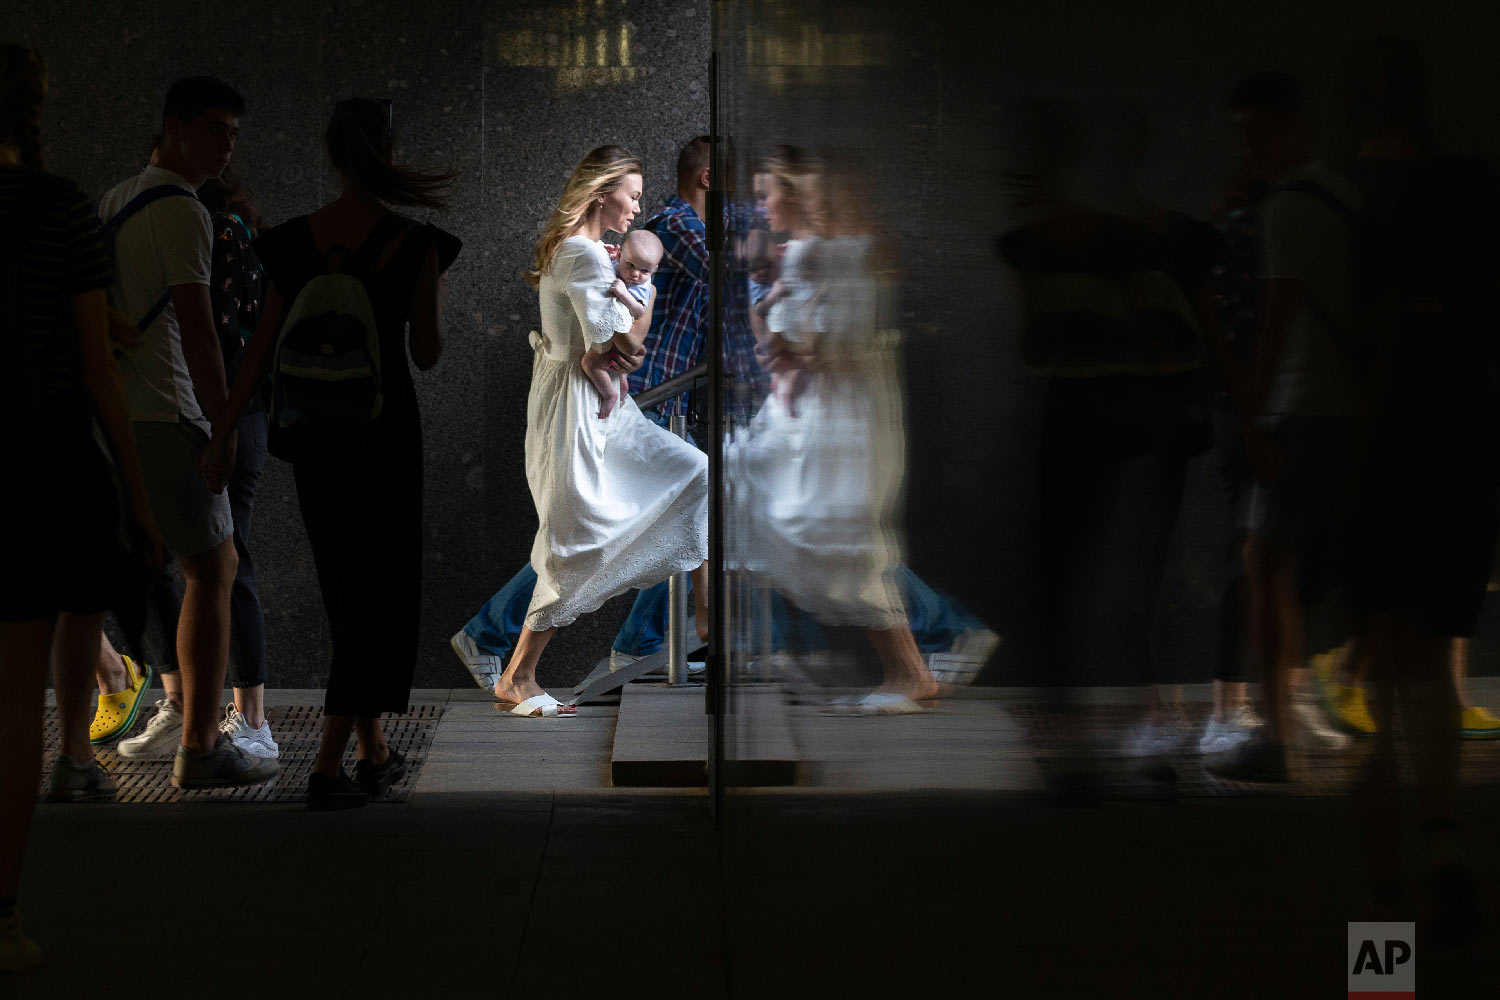  A woman carrying her child is reflected in a wall as she steps up in a subway in Moscow, Russia on Aug. 29, 2018. (AP Photo/Alexander Zemlianichenko) 